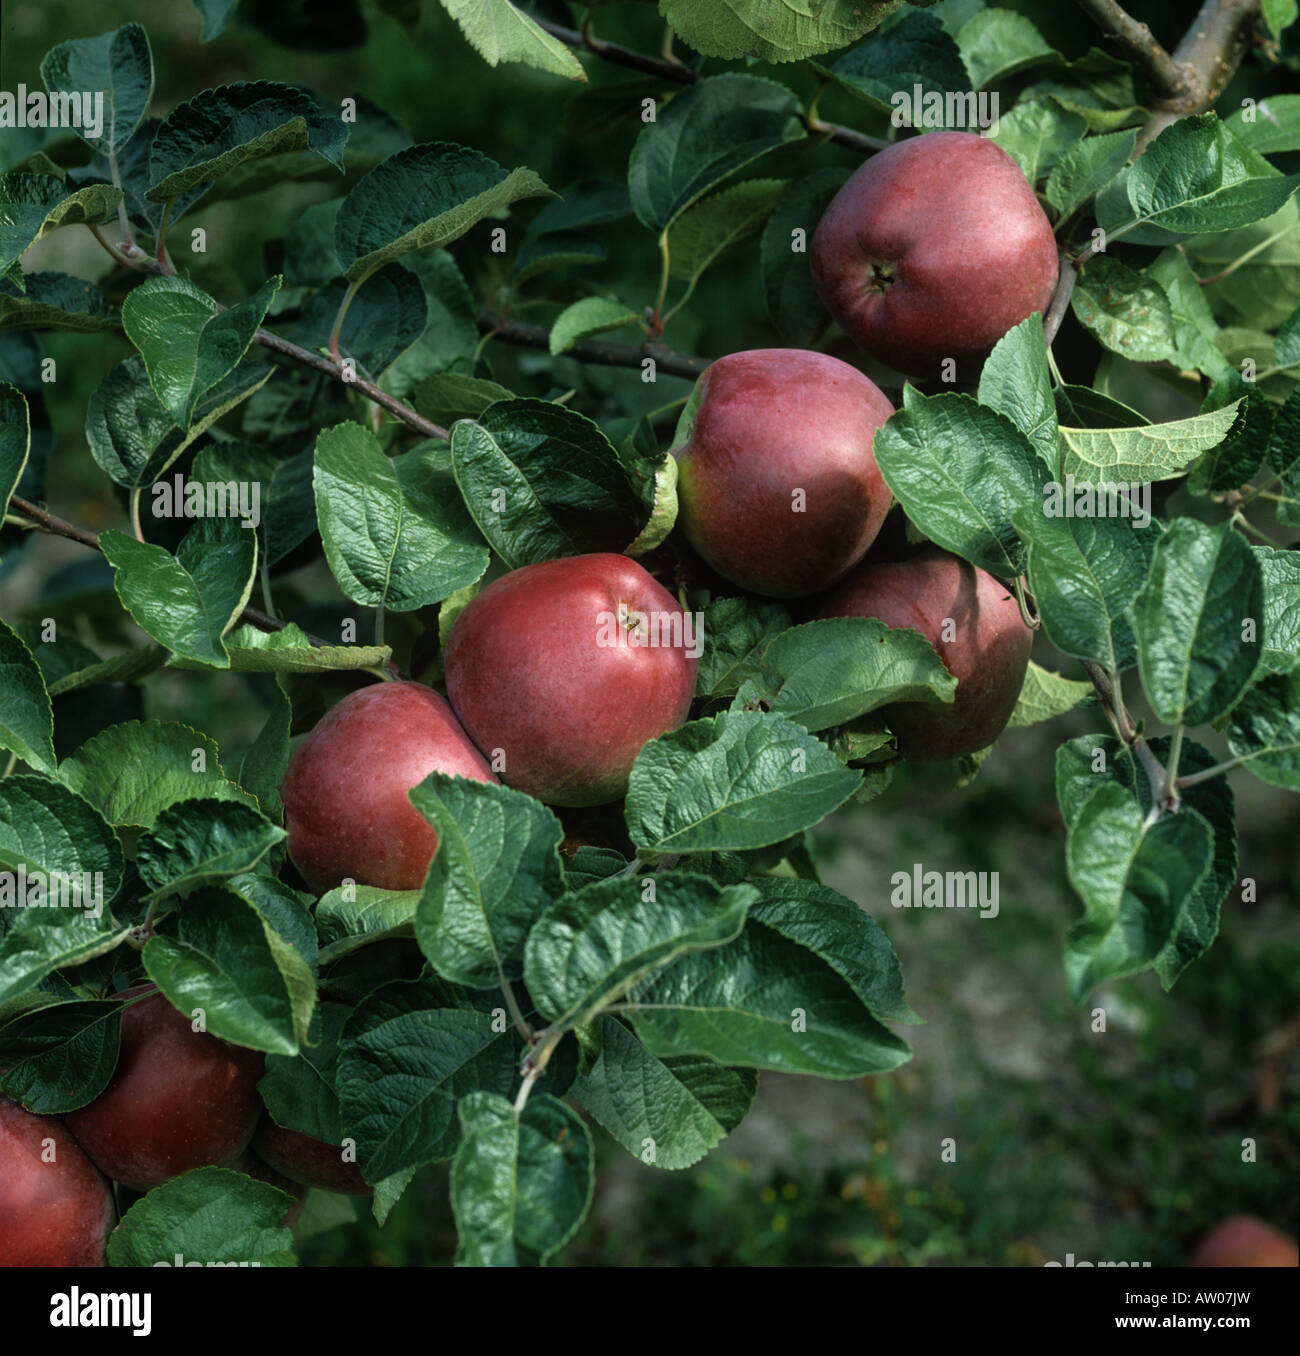 Mature Spartan apples on the tree Stock Photo